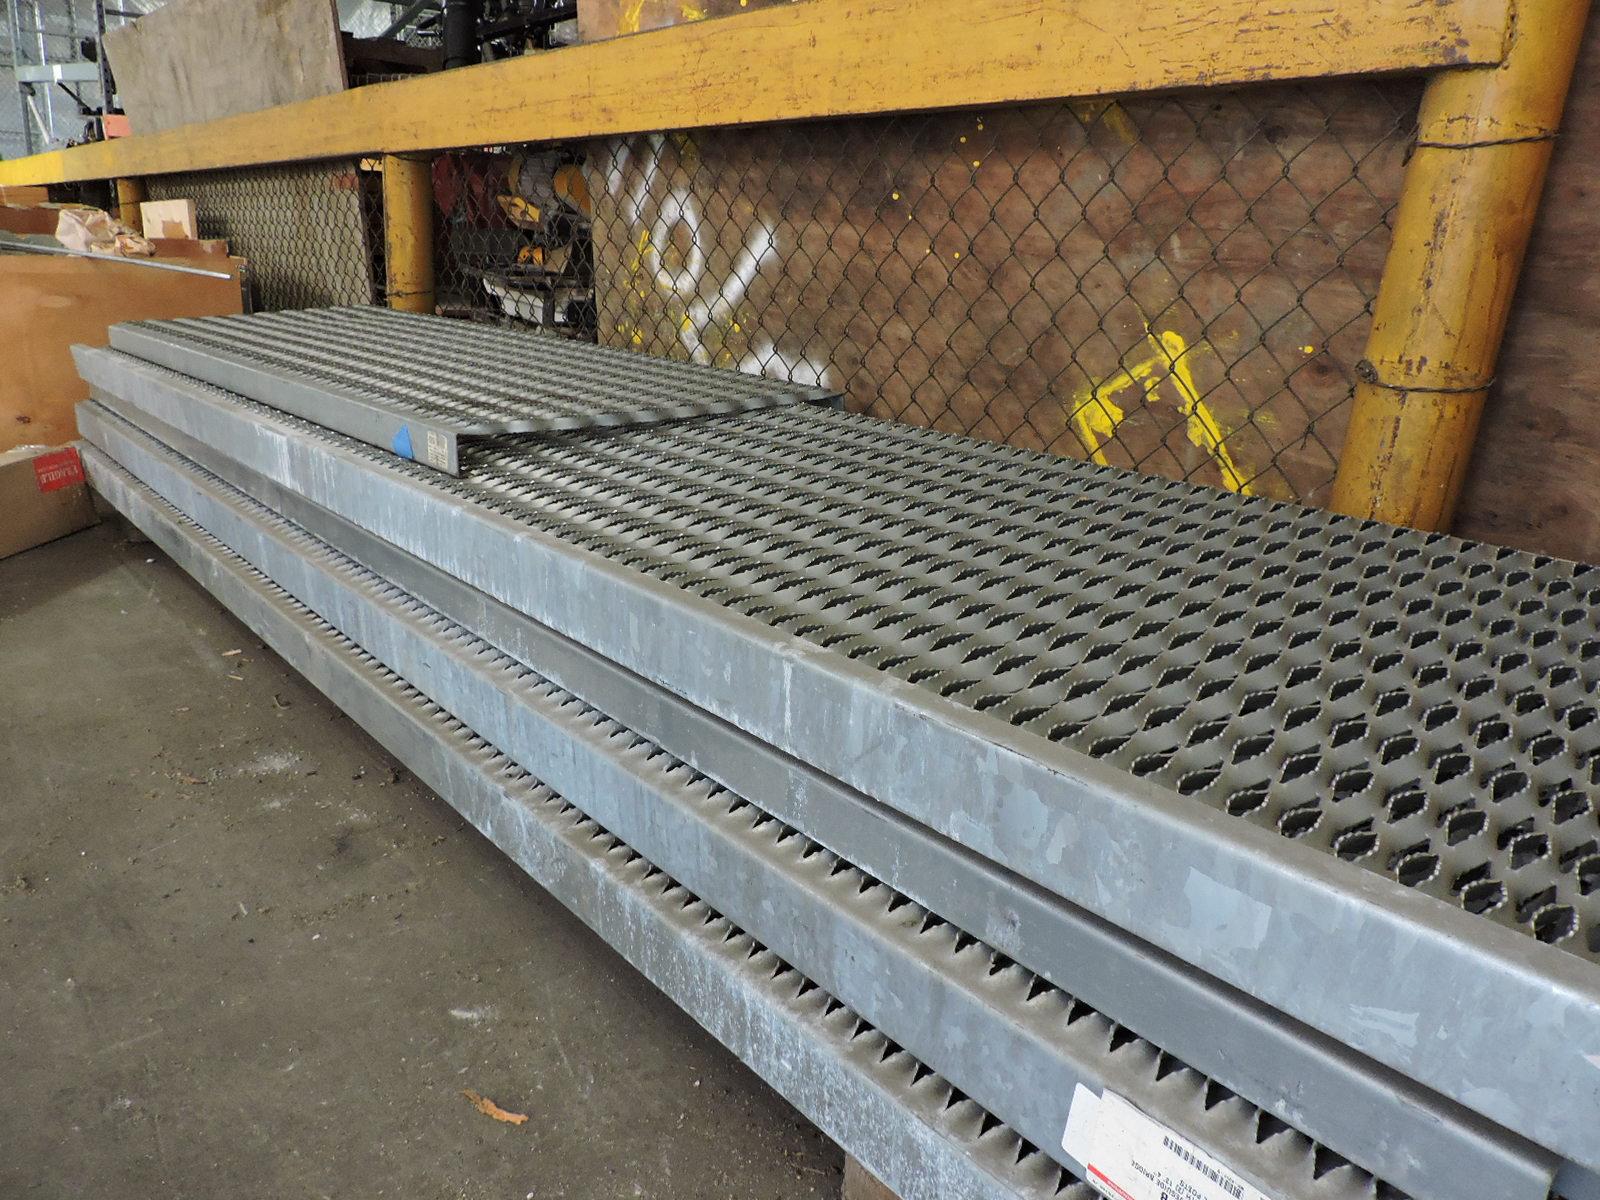 Catwalk Treads - 8 Ten Foot Sections and 1 Five Foot Section